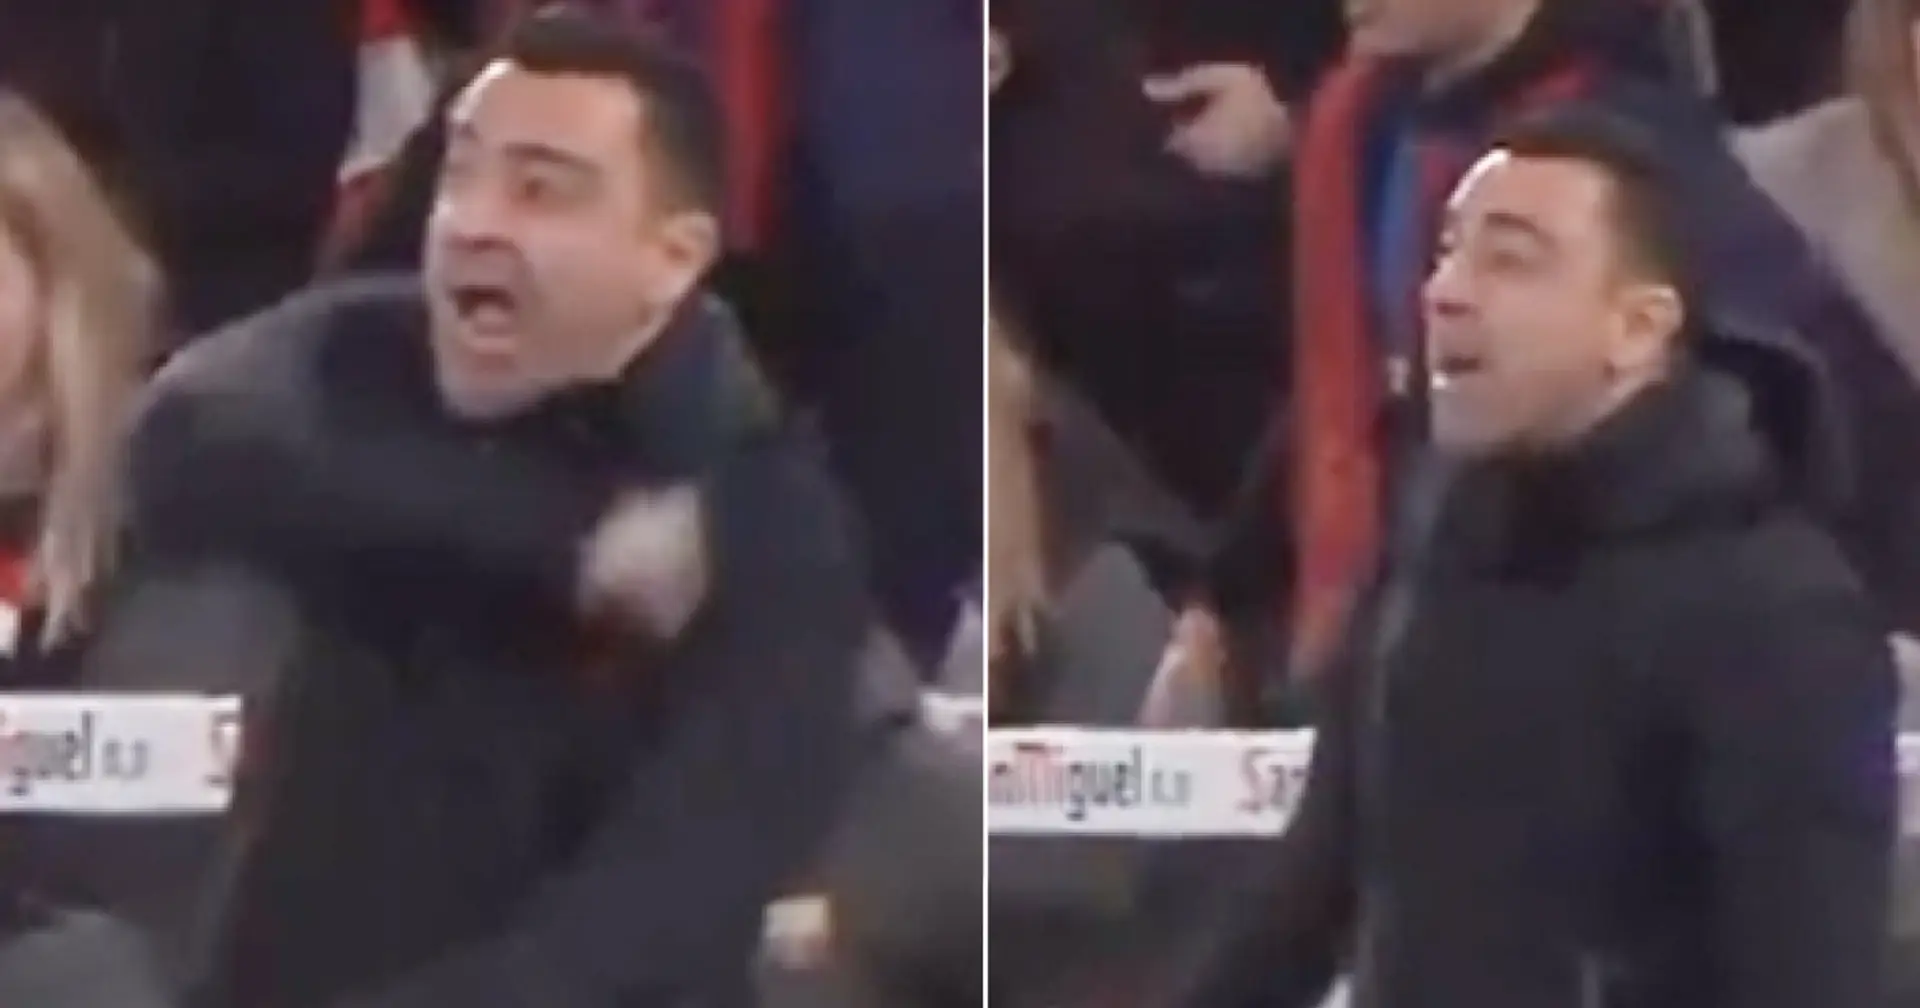 Microphones pick up what Xavi said as he loses his temper in Bilbao, swears at his players